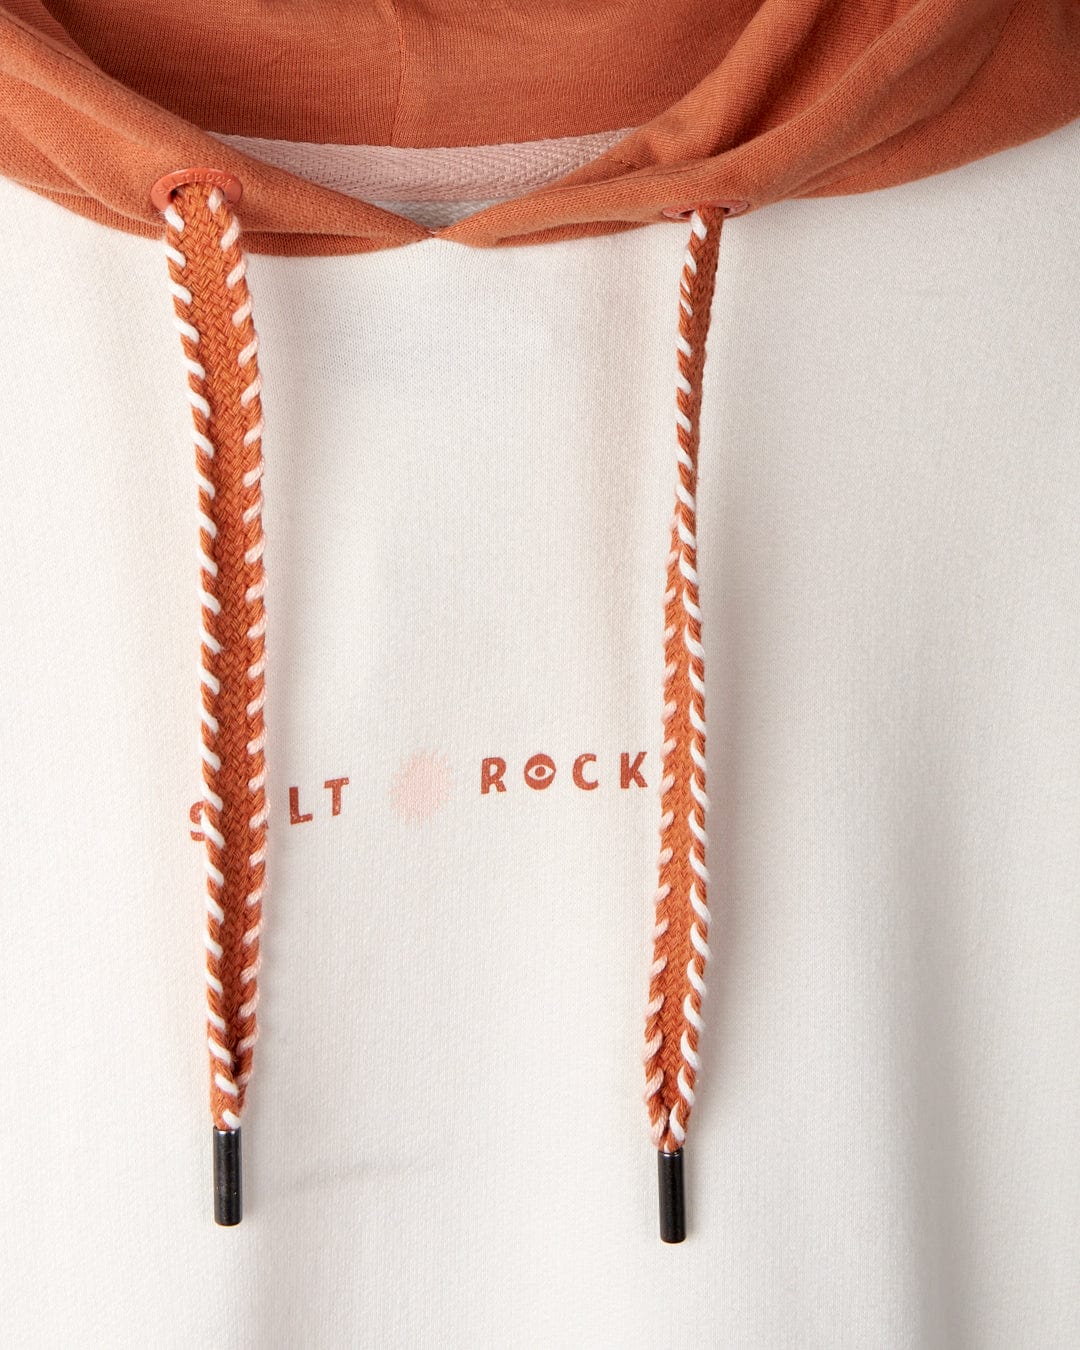 Close-up of a cotton hoodie with an orange hood, orange and white drawstrings, and the partially visible Saltrock branding "S LT ROCK" on the white fabric. The product is Palmera - Womens Pop Hoodie - Cream by Saltrock.